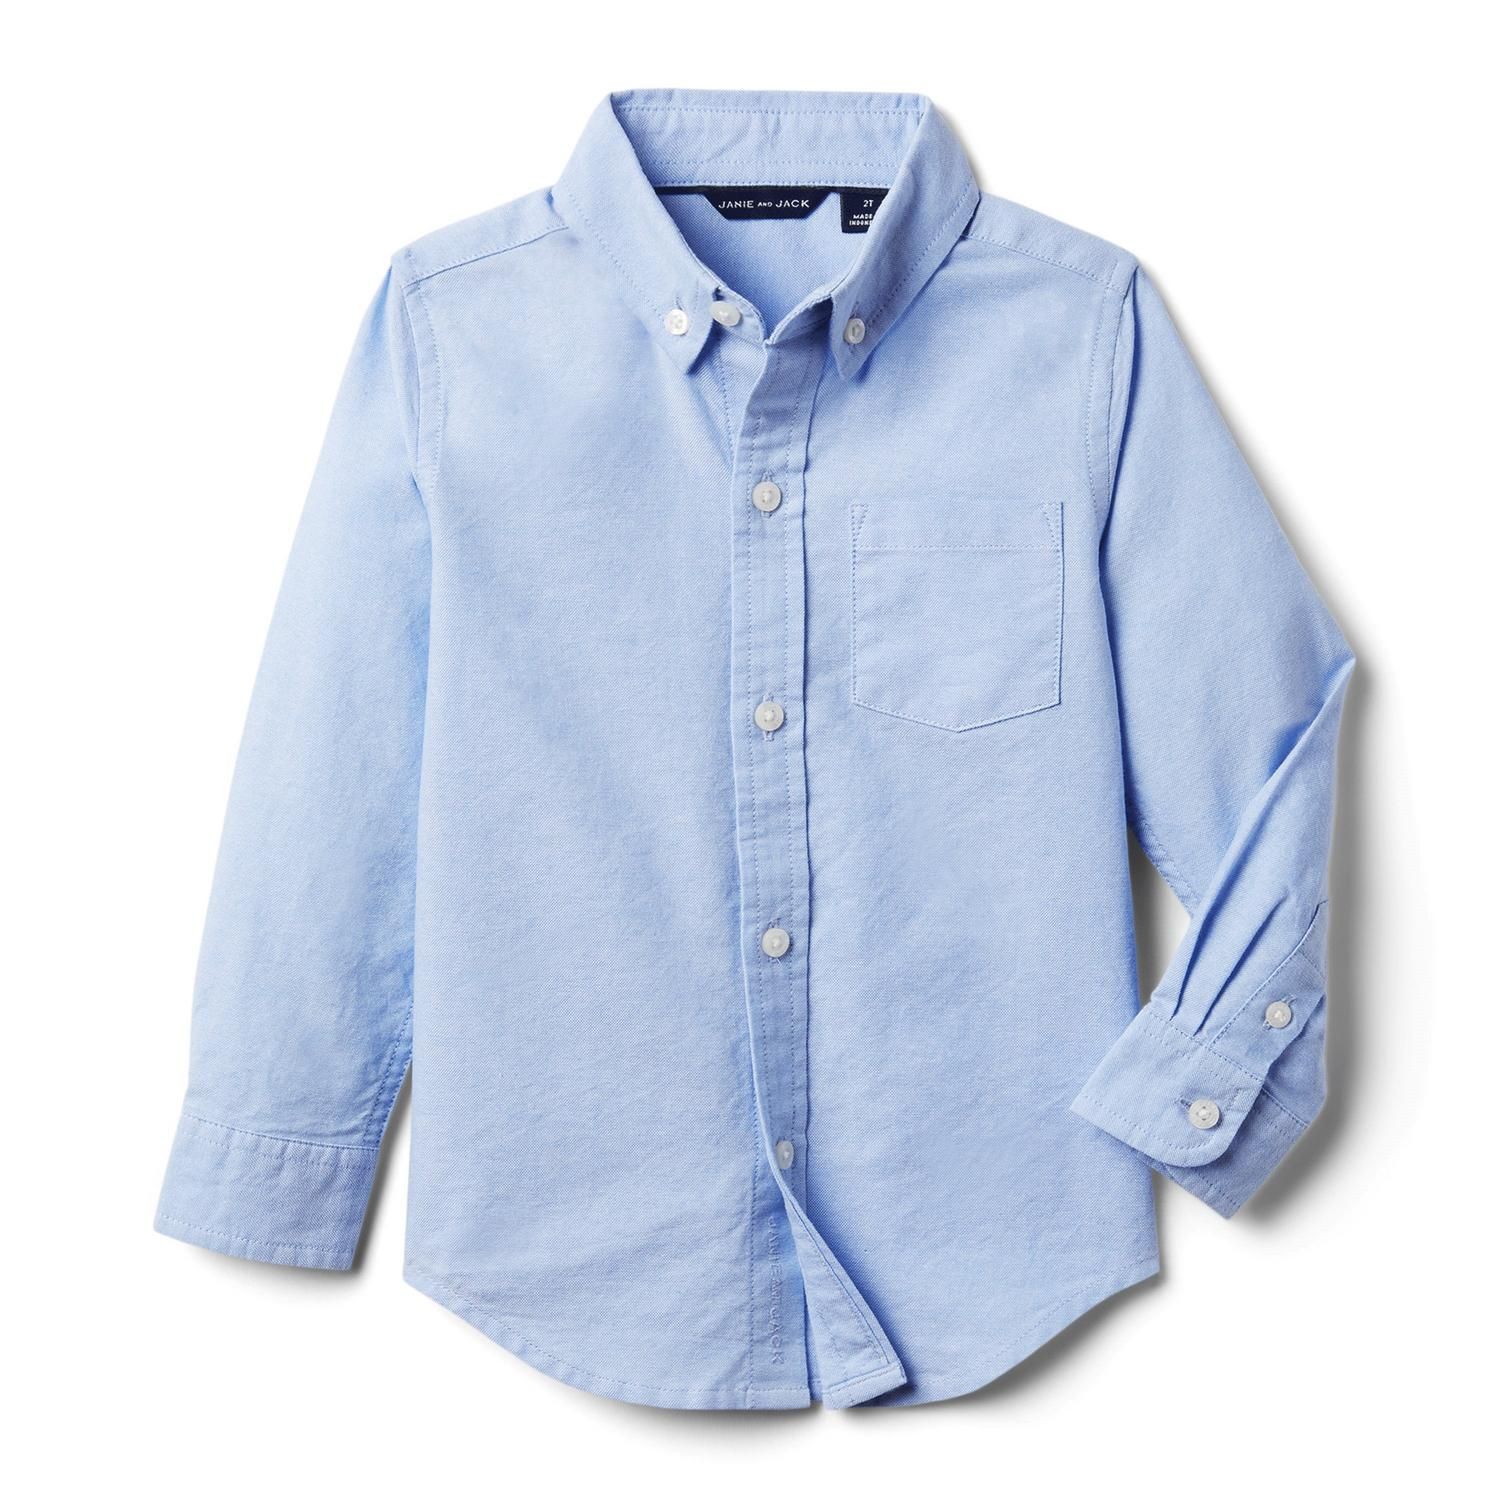 The Oxford Shirt | Janie and Jack